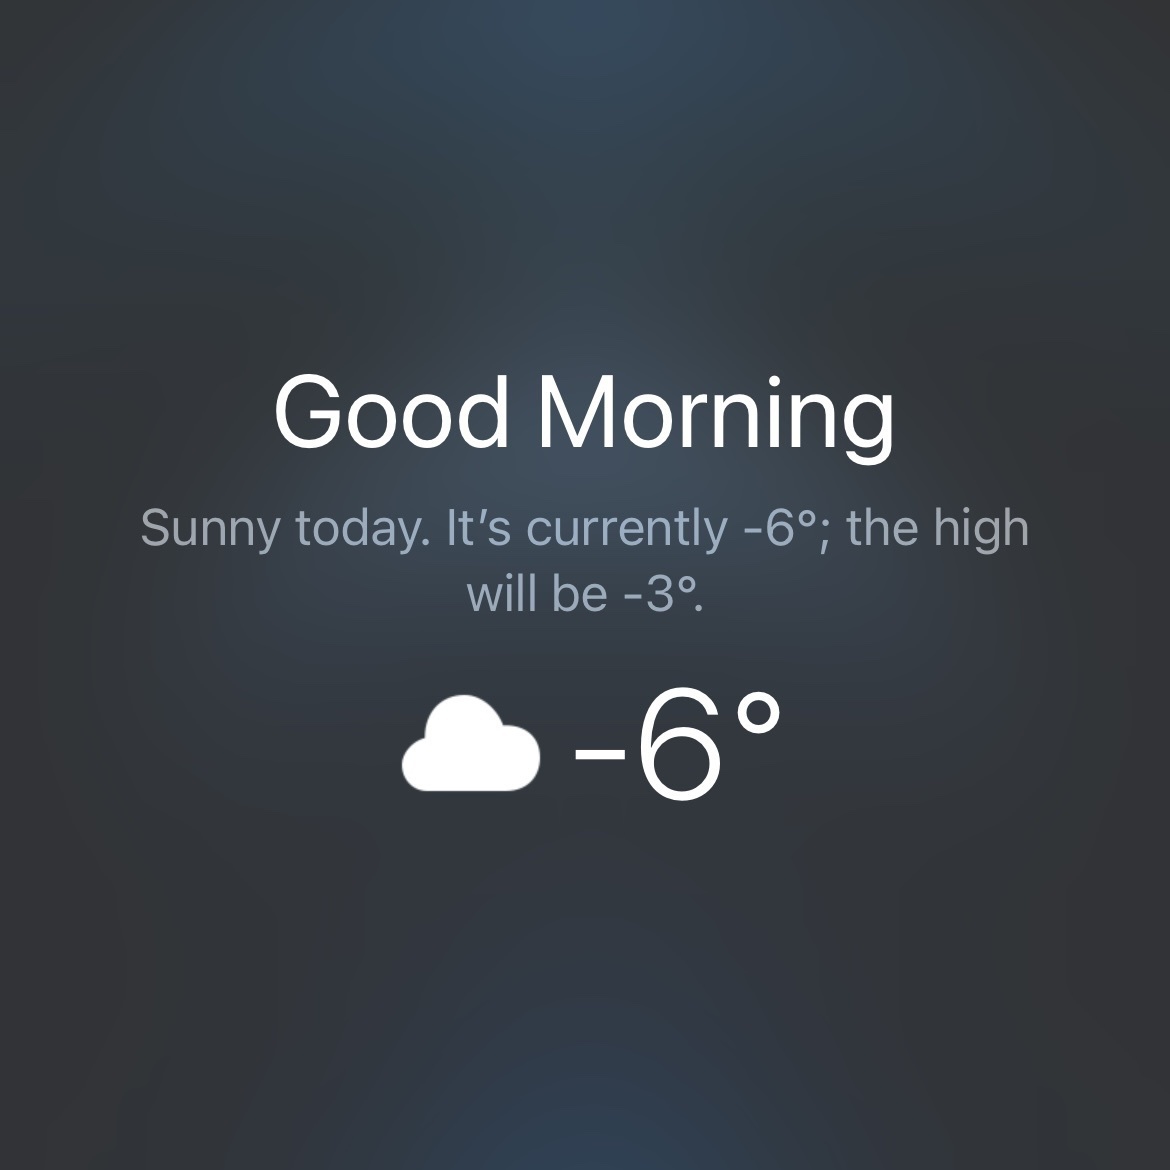 A screenshot of a portion of an iPhone lock screen saying "Good Morning" and indicating a current temperature of -6C.